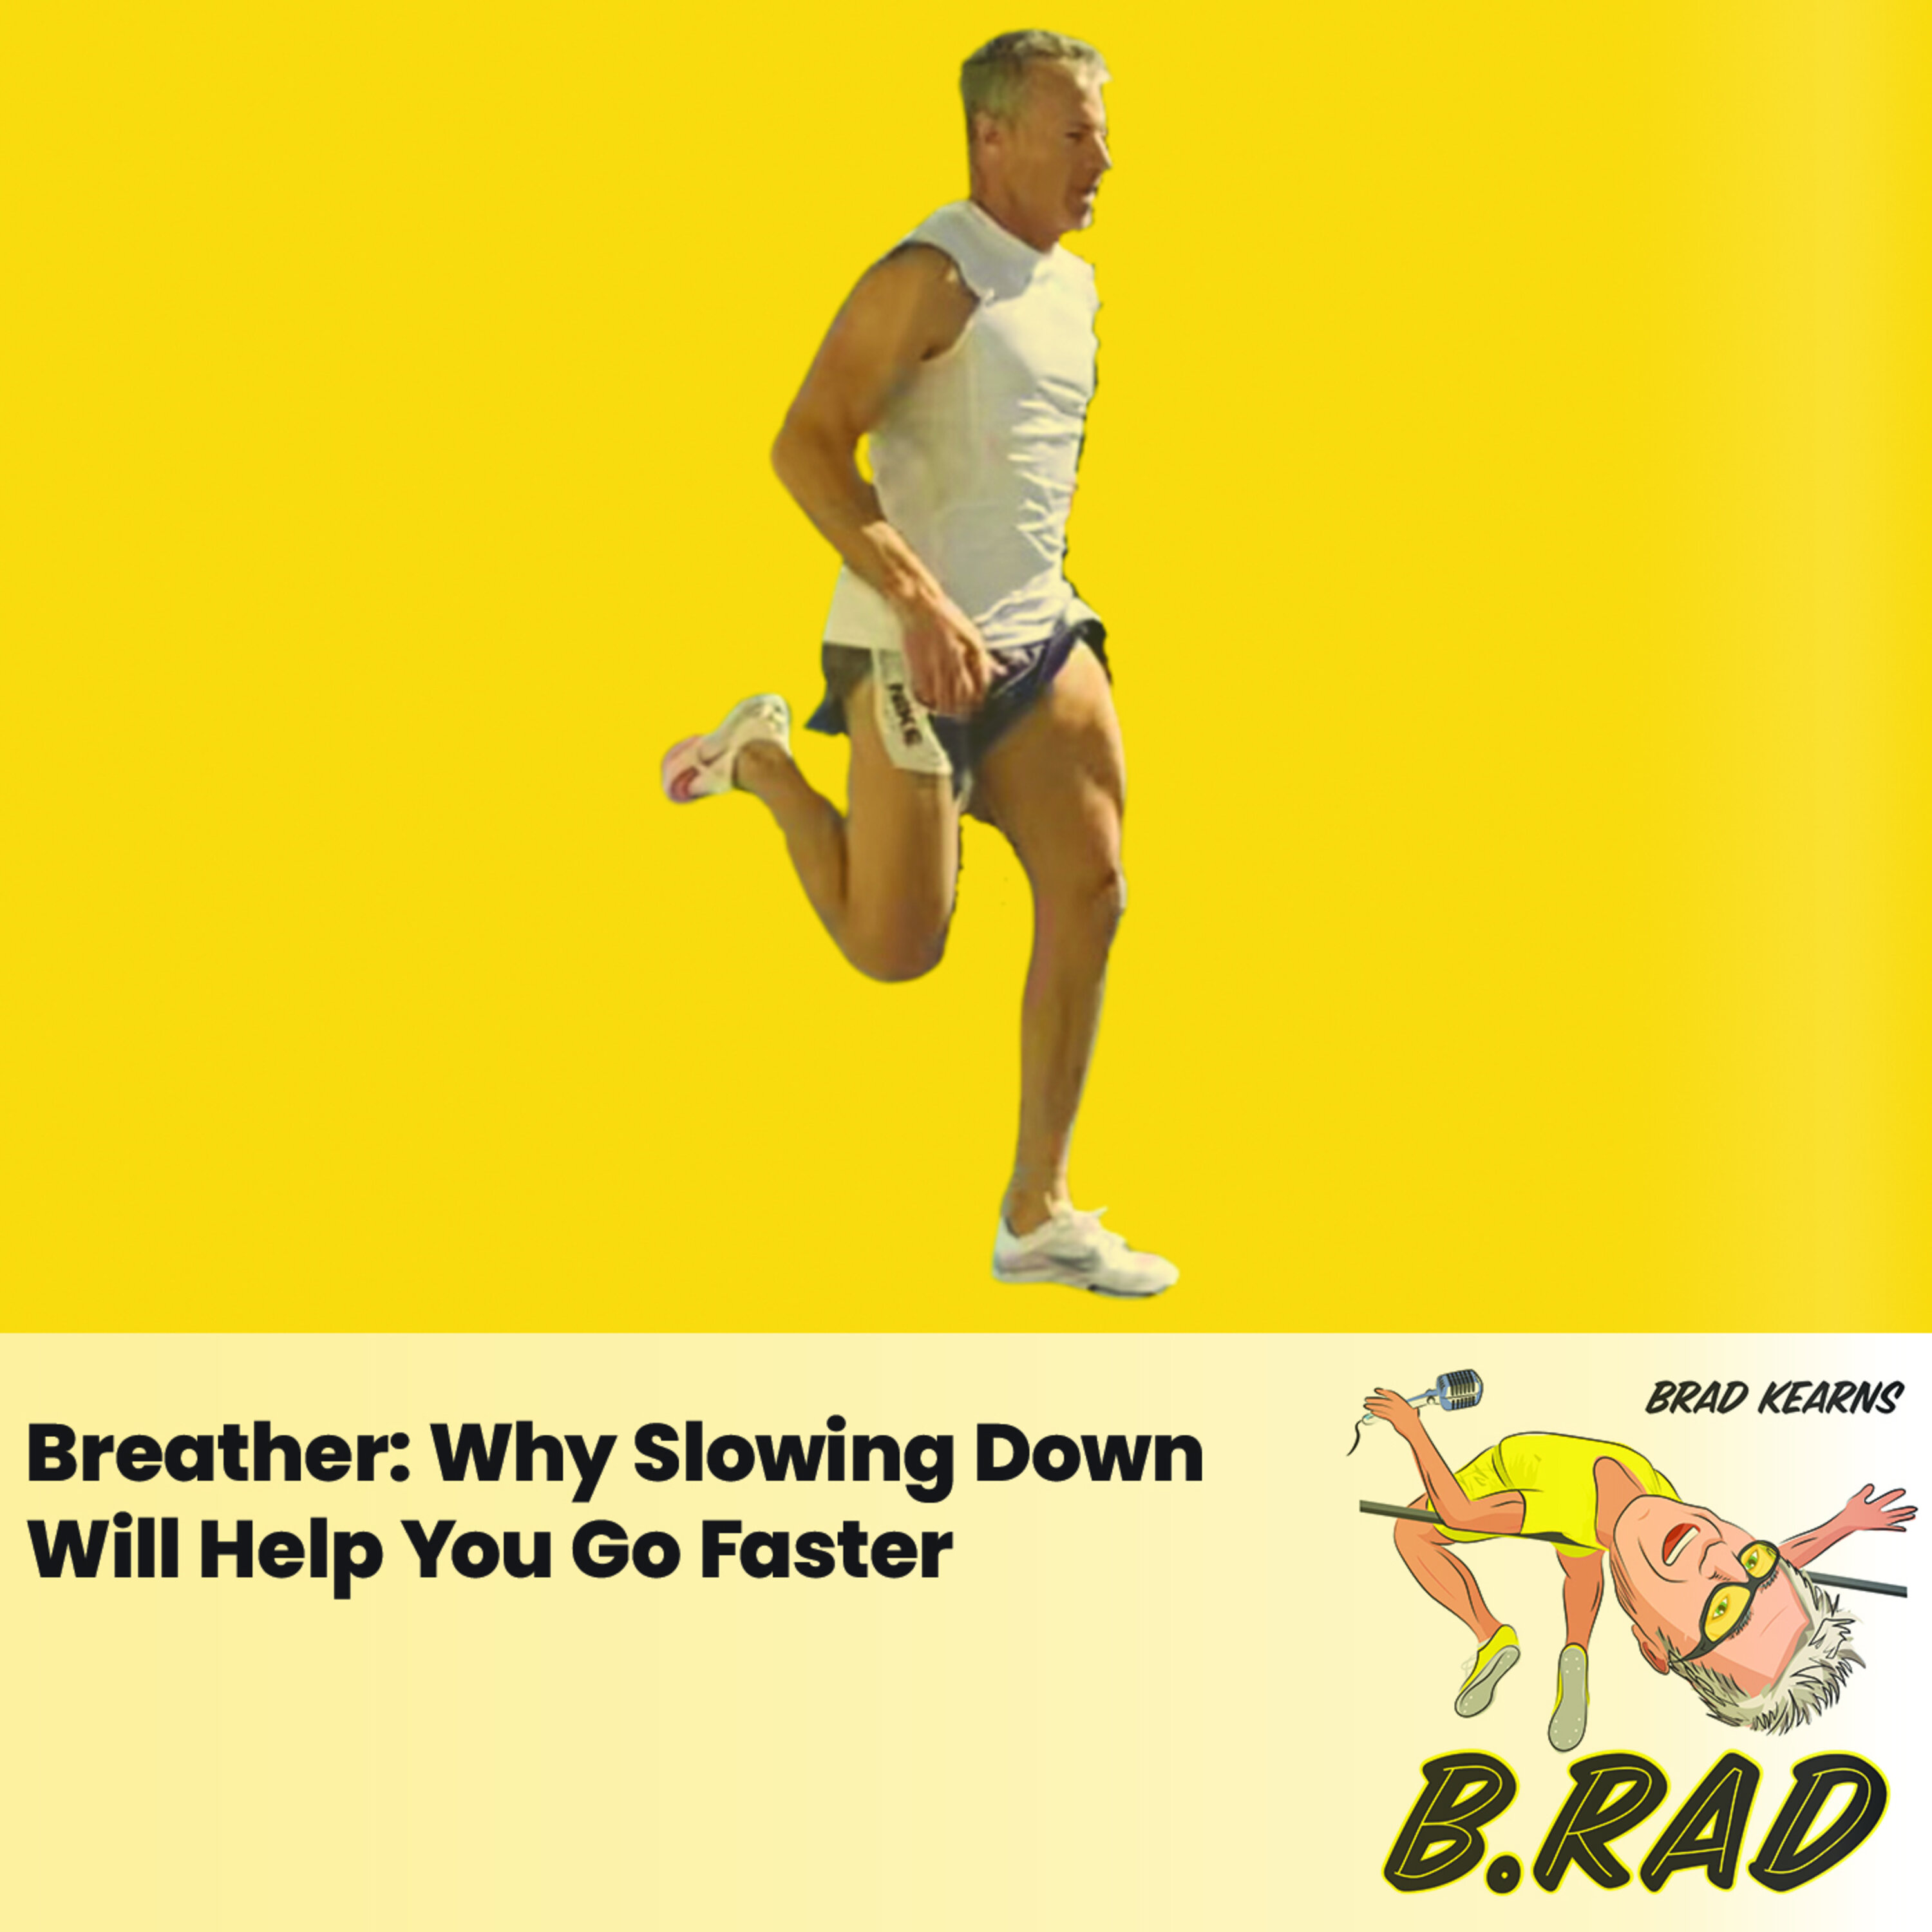 Breather: Why Slowing Down Will Help You Go Faster